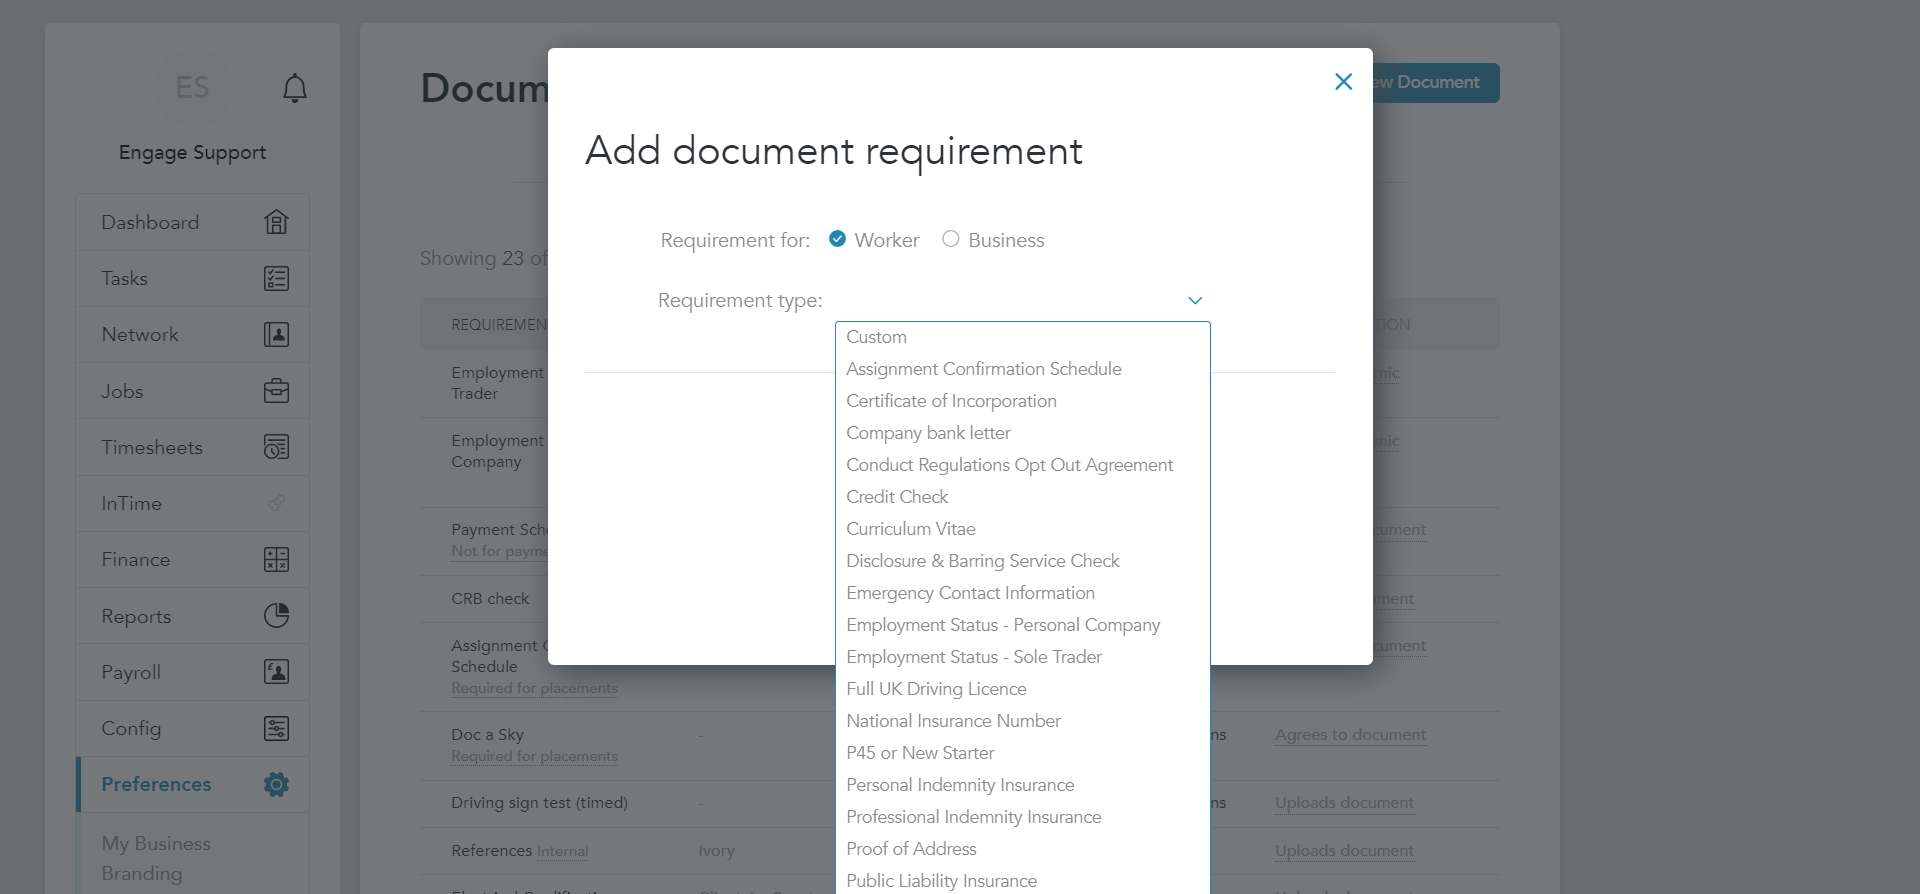 Documents Overview – Engage Help Center